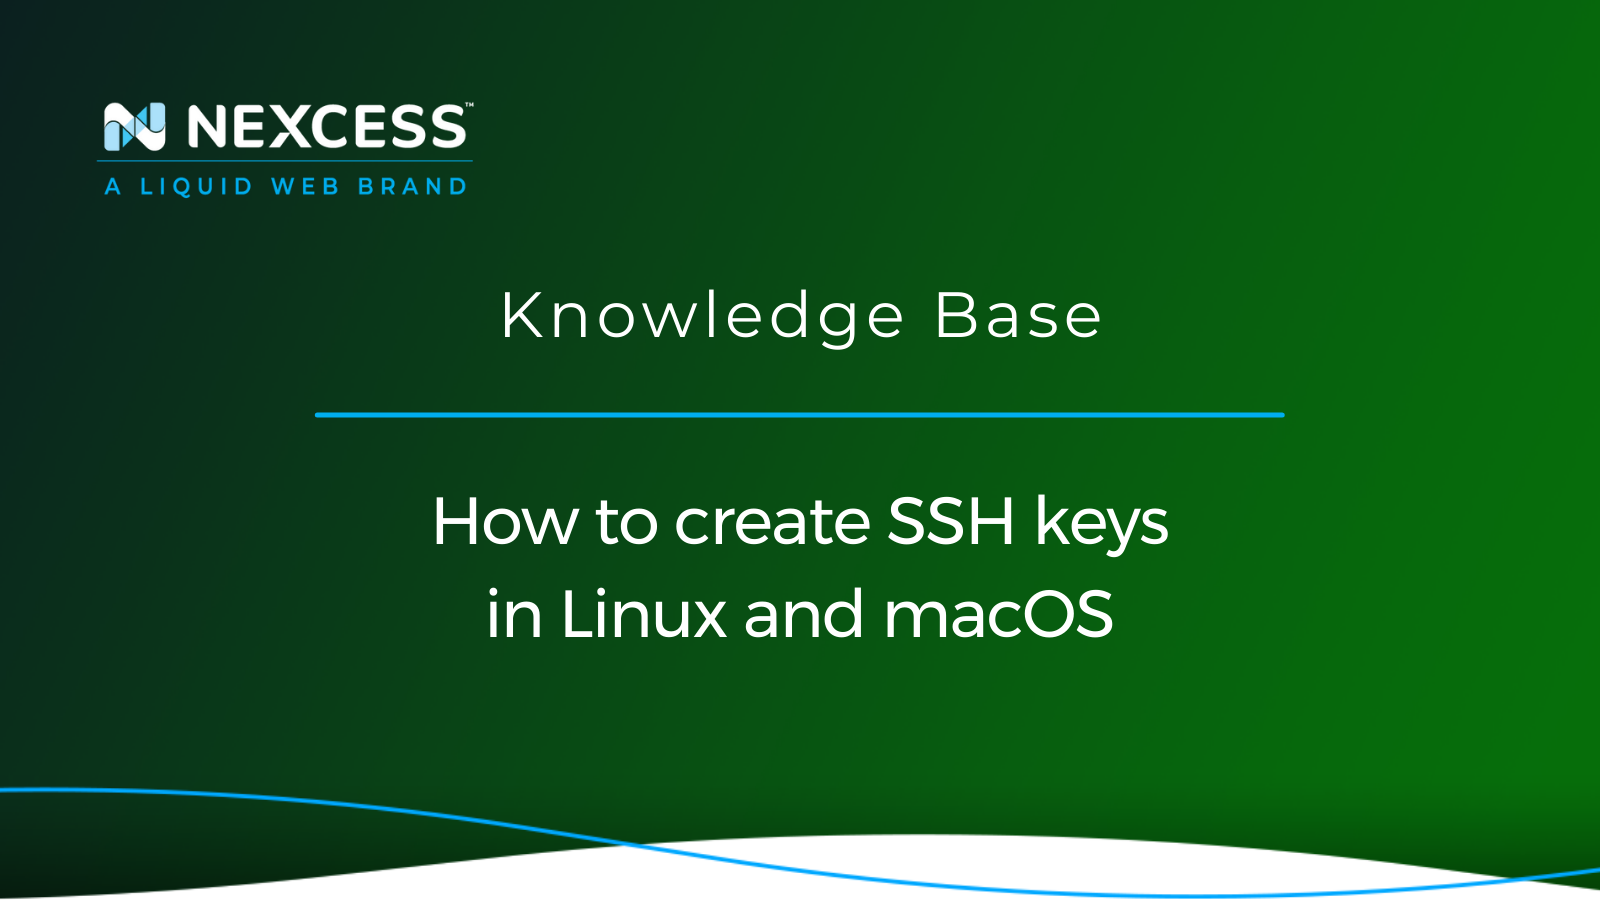 How to create SSH keys in macOS and Linux